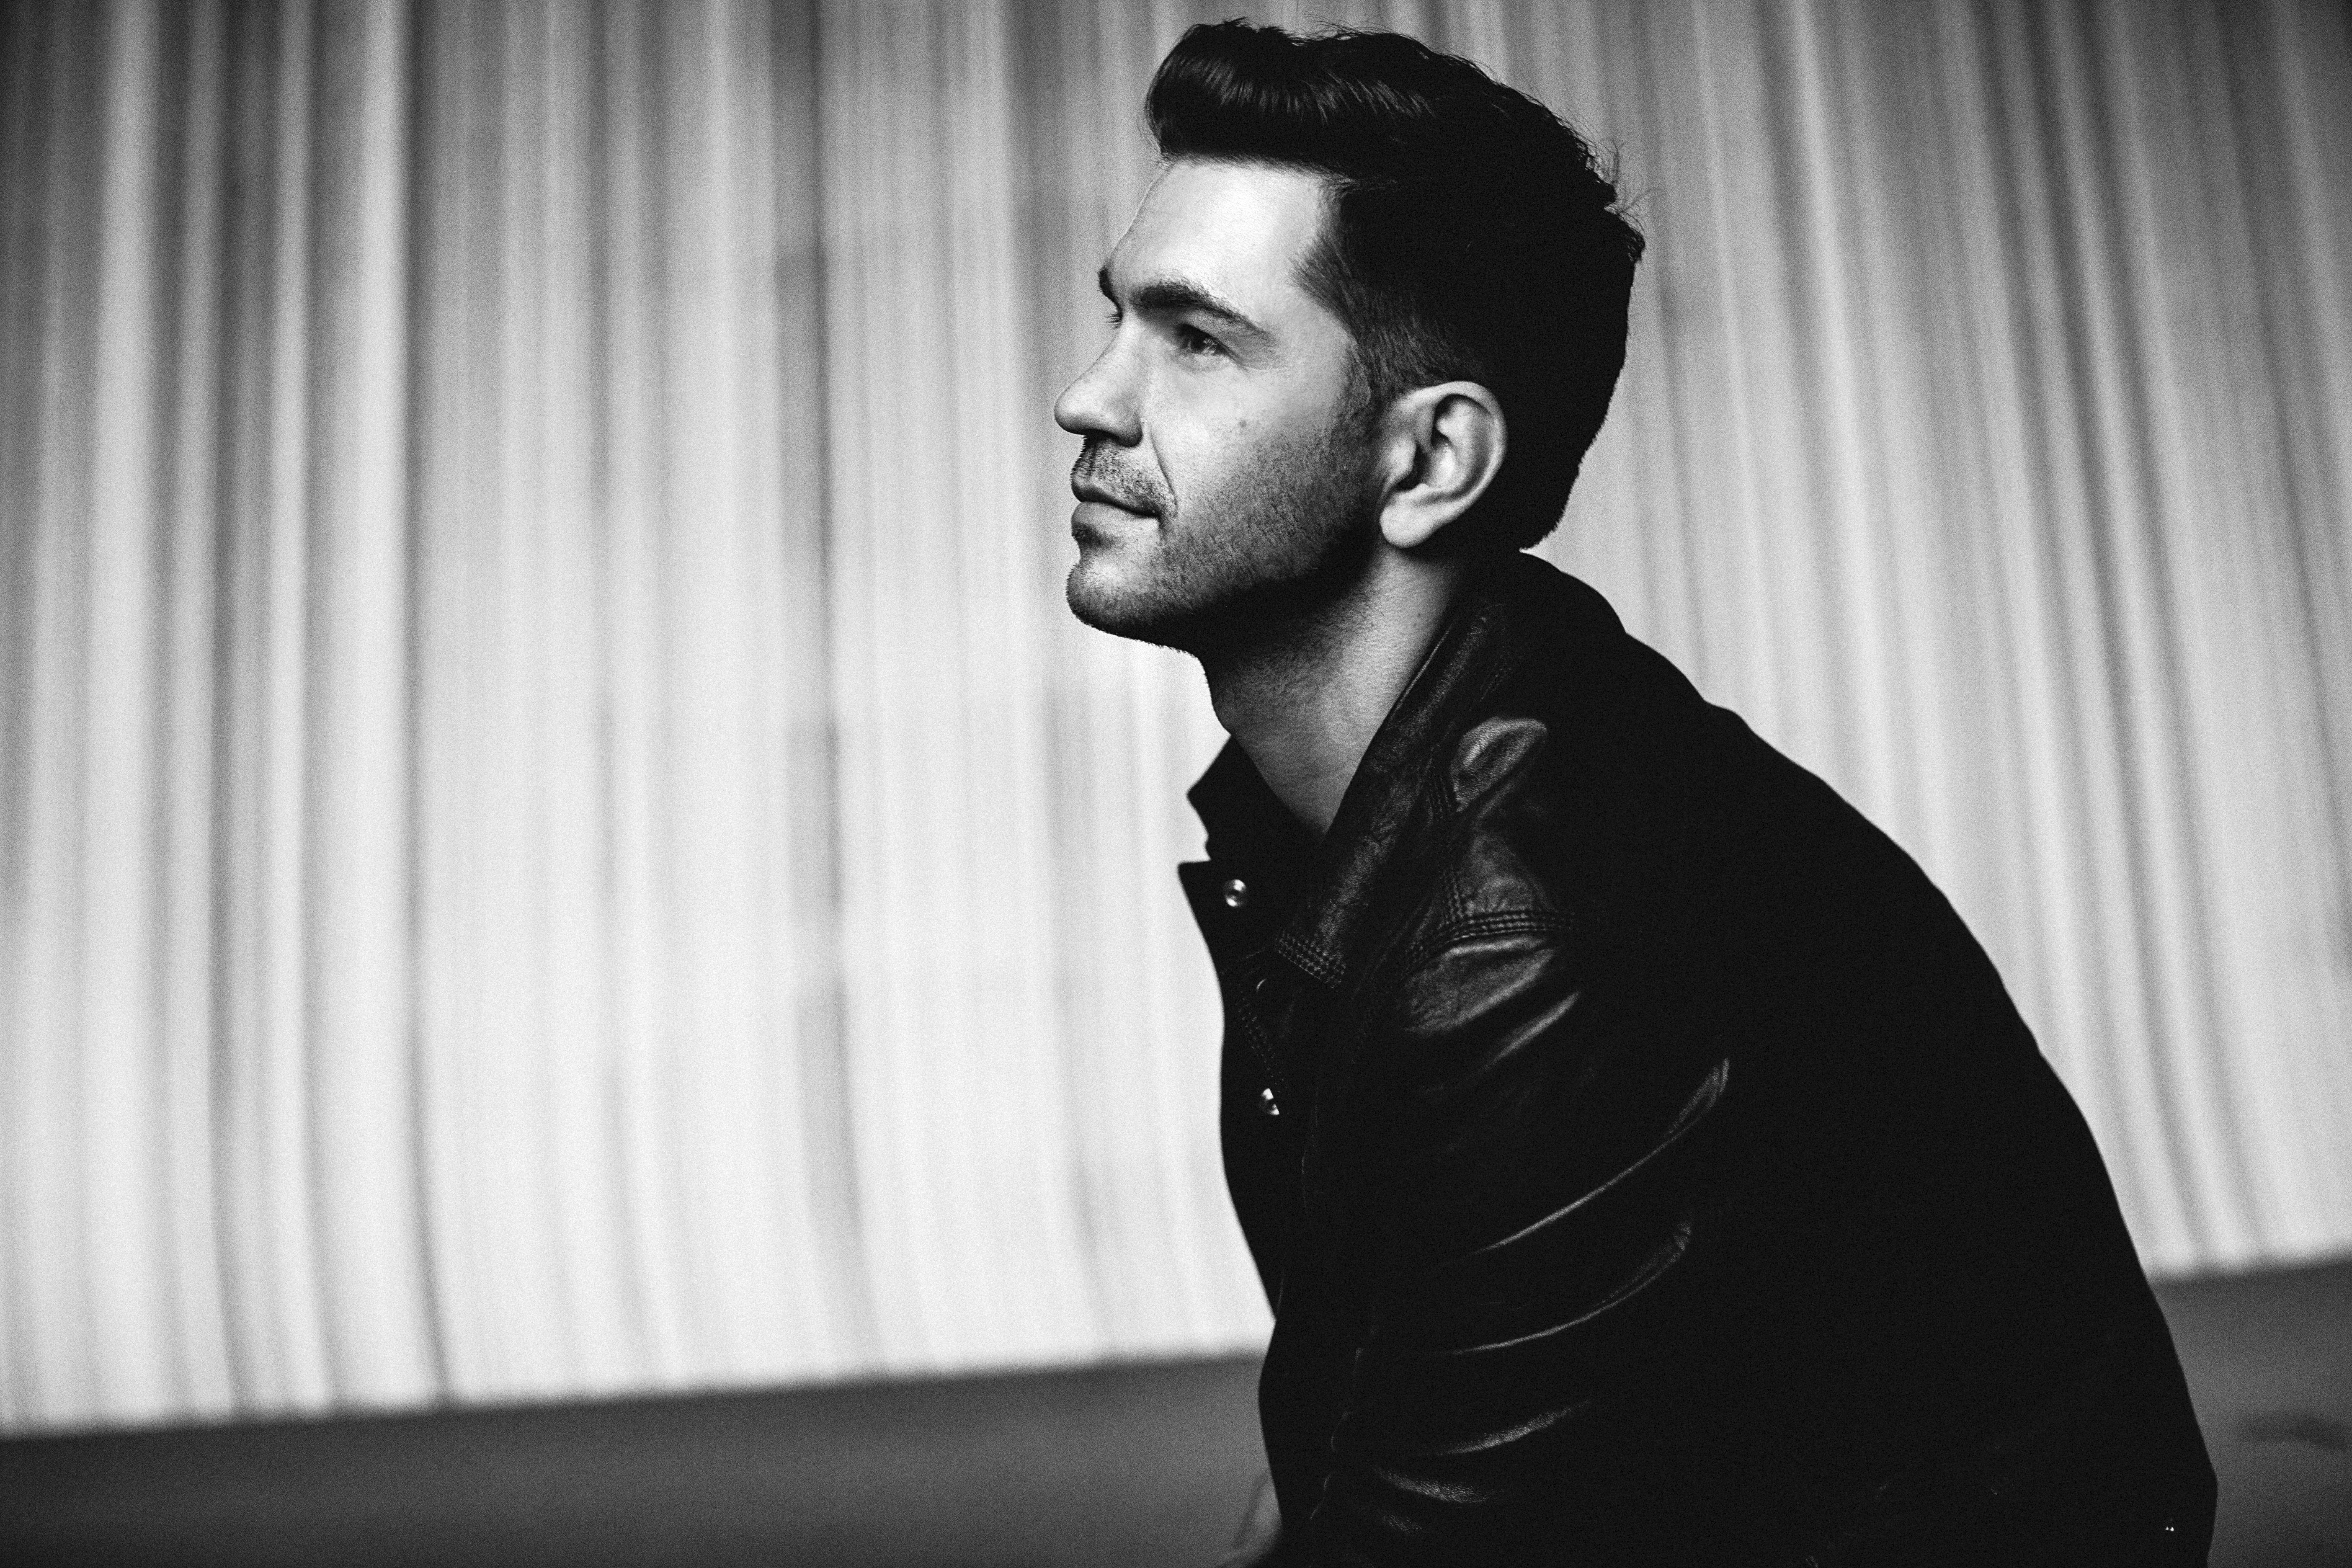 Andy Grammer Say's He's 'Good' with Not Being Labeled This or That